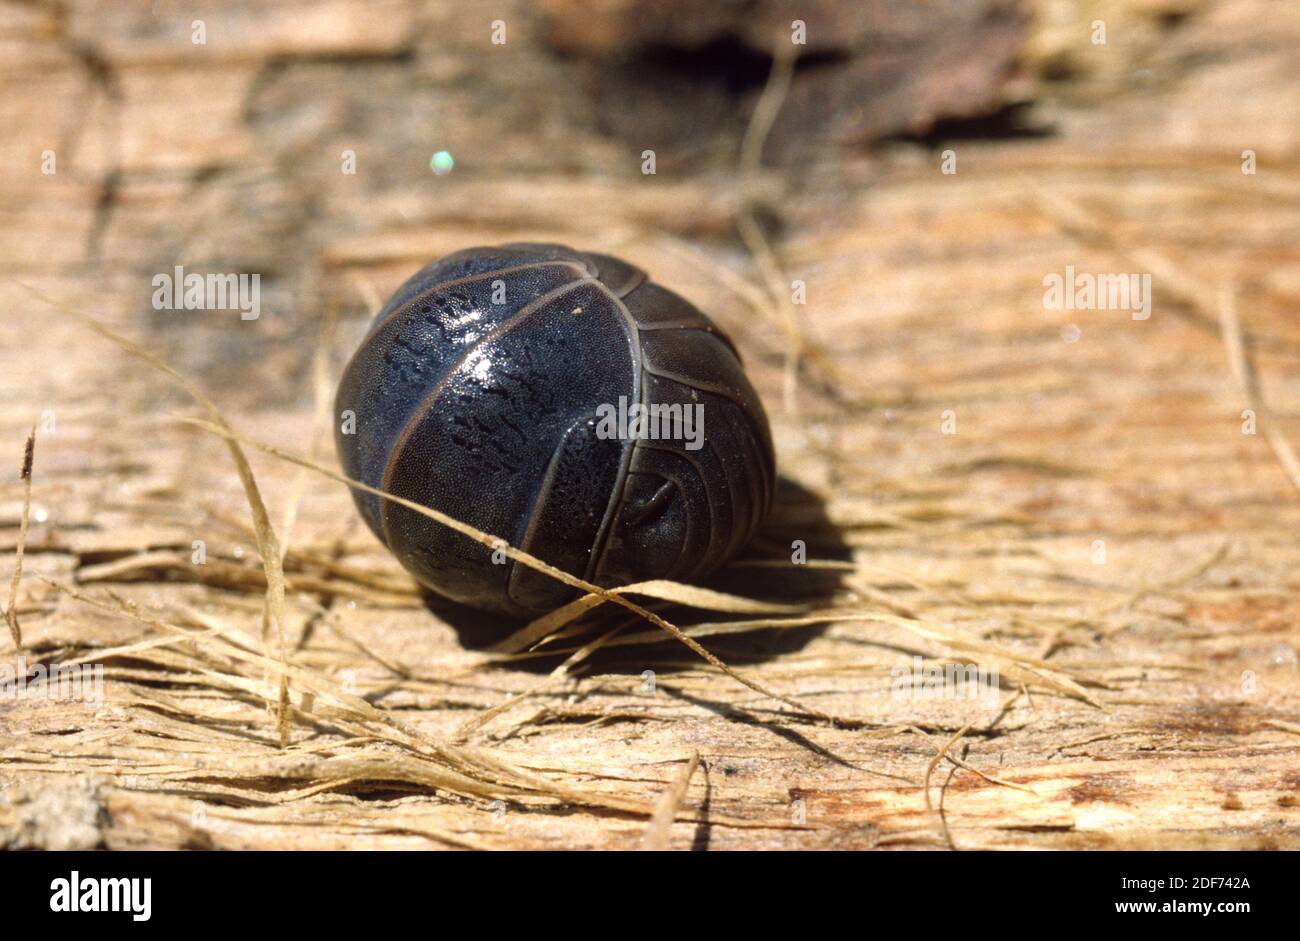 Pill woodlouse or pill-bug (Armadillidium vulgare) is a terrestrial crustacean that lives in humid areas of Mediterranean region. Stock Photo